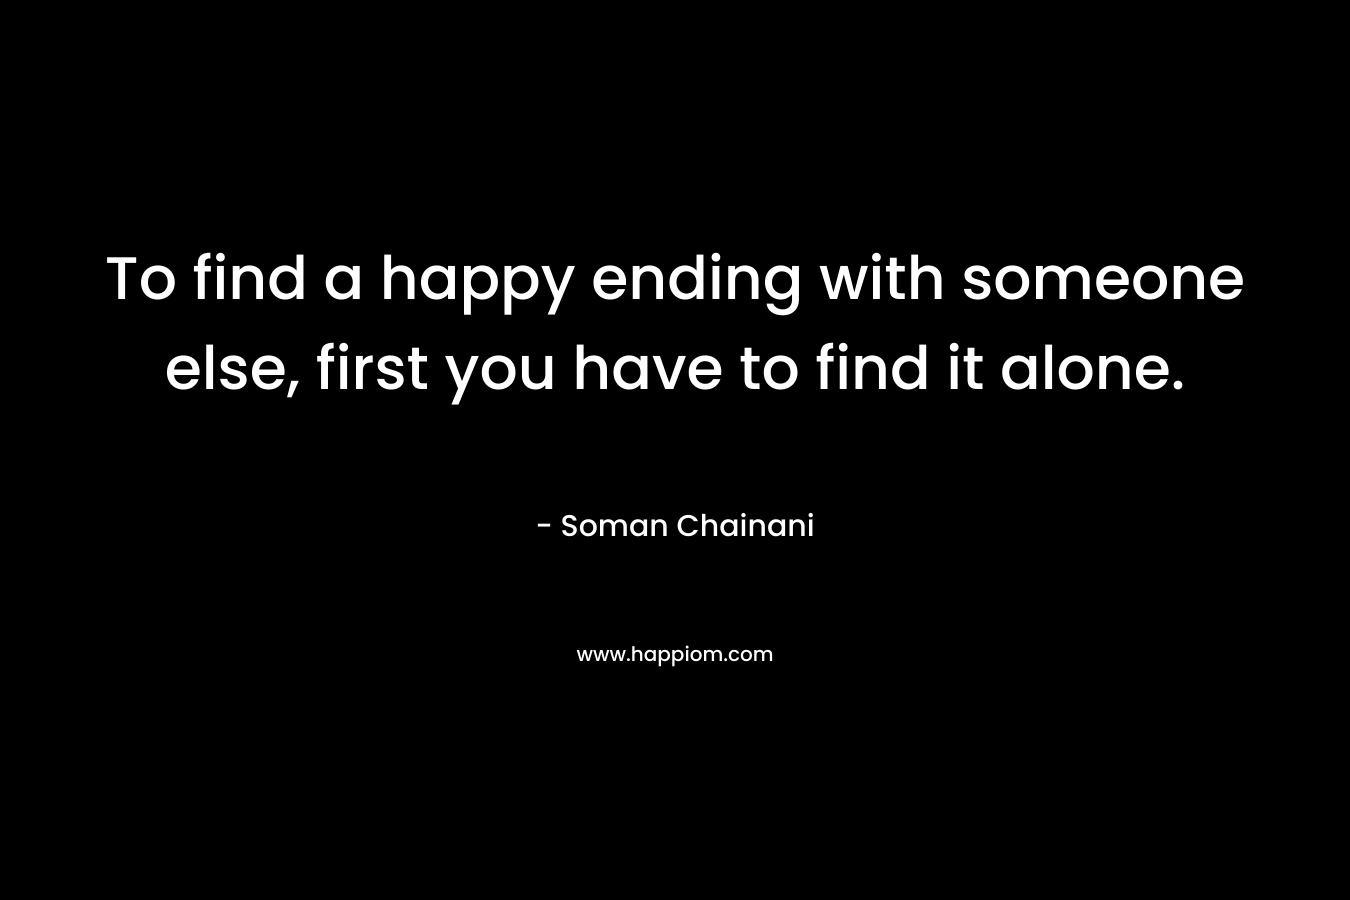 To find a happy ending with someone else, first you have to find it alone.